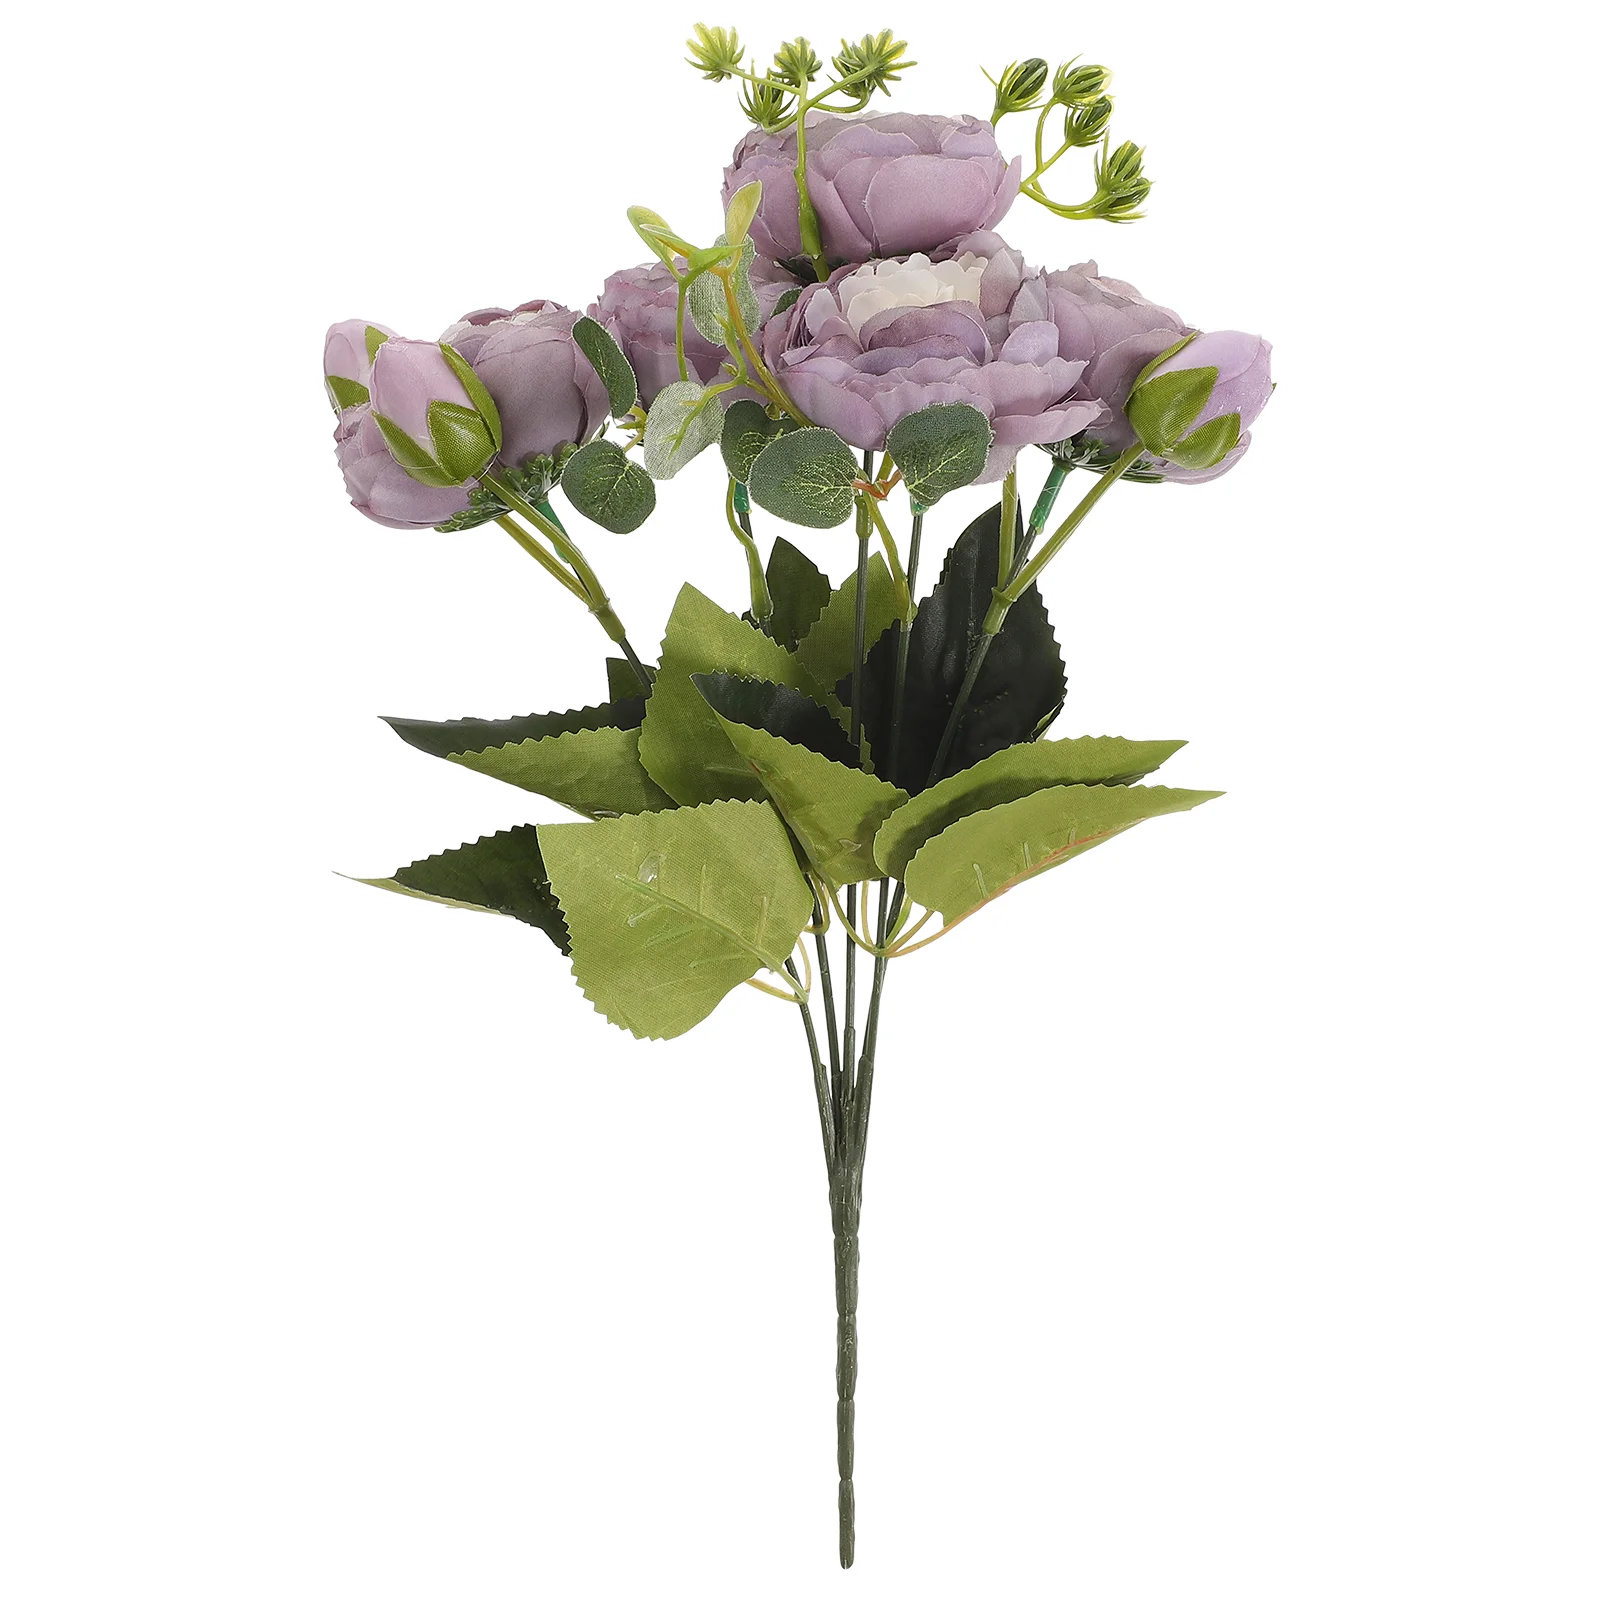 

Flowers Artificial Peony Flower Bouquets Peonies Silk Bouquet Hand Fake Bridal Wedding Holding Stem Purple Festival Cemetery